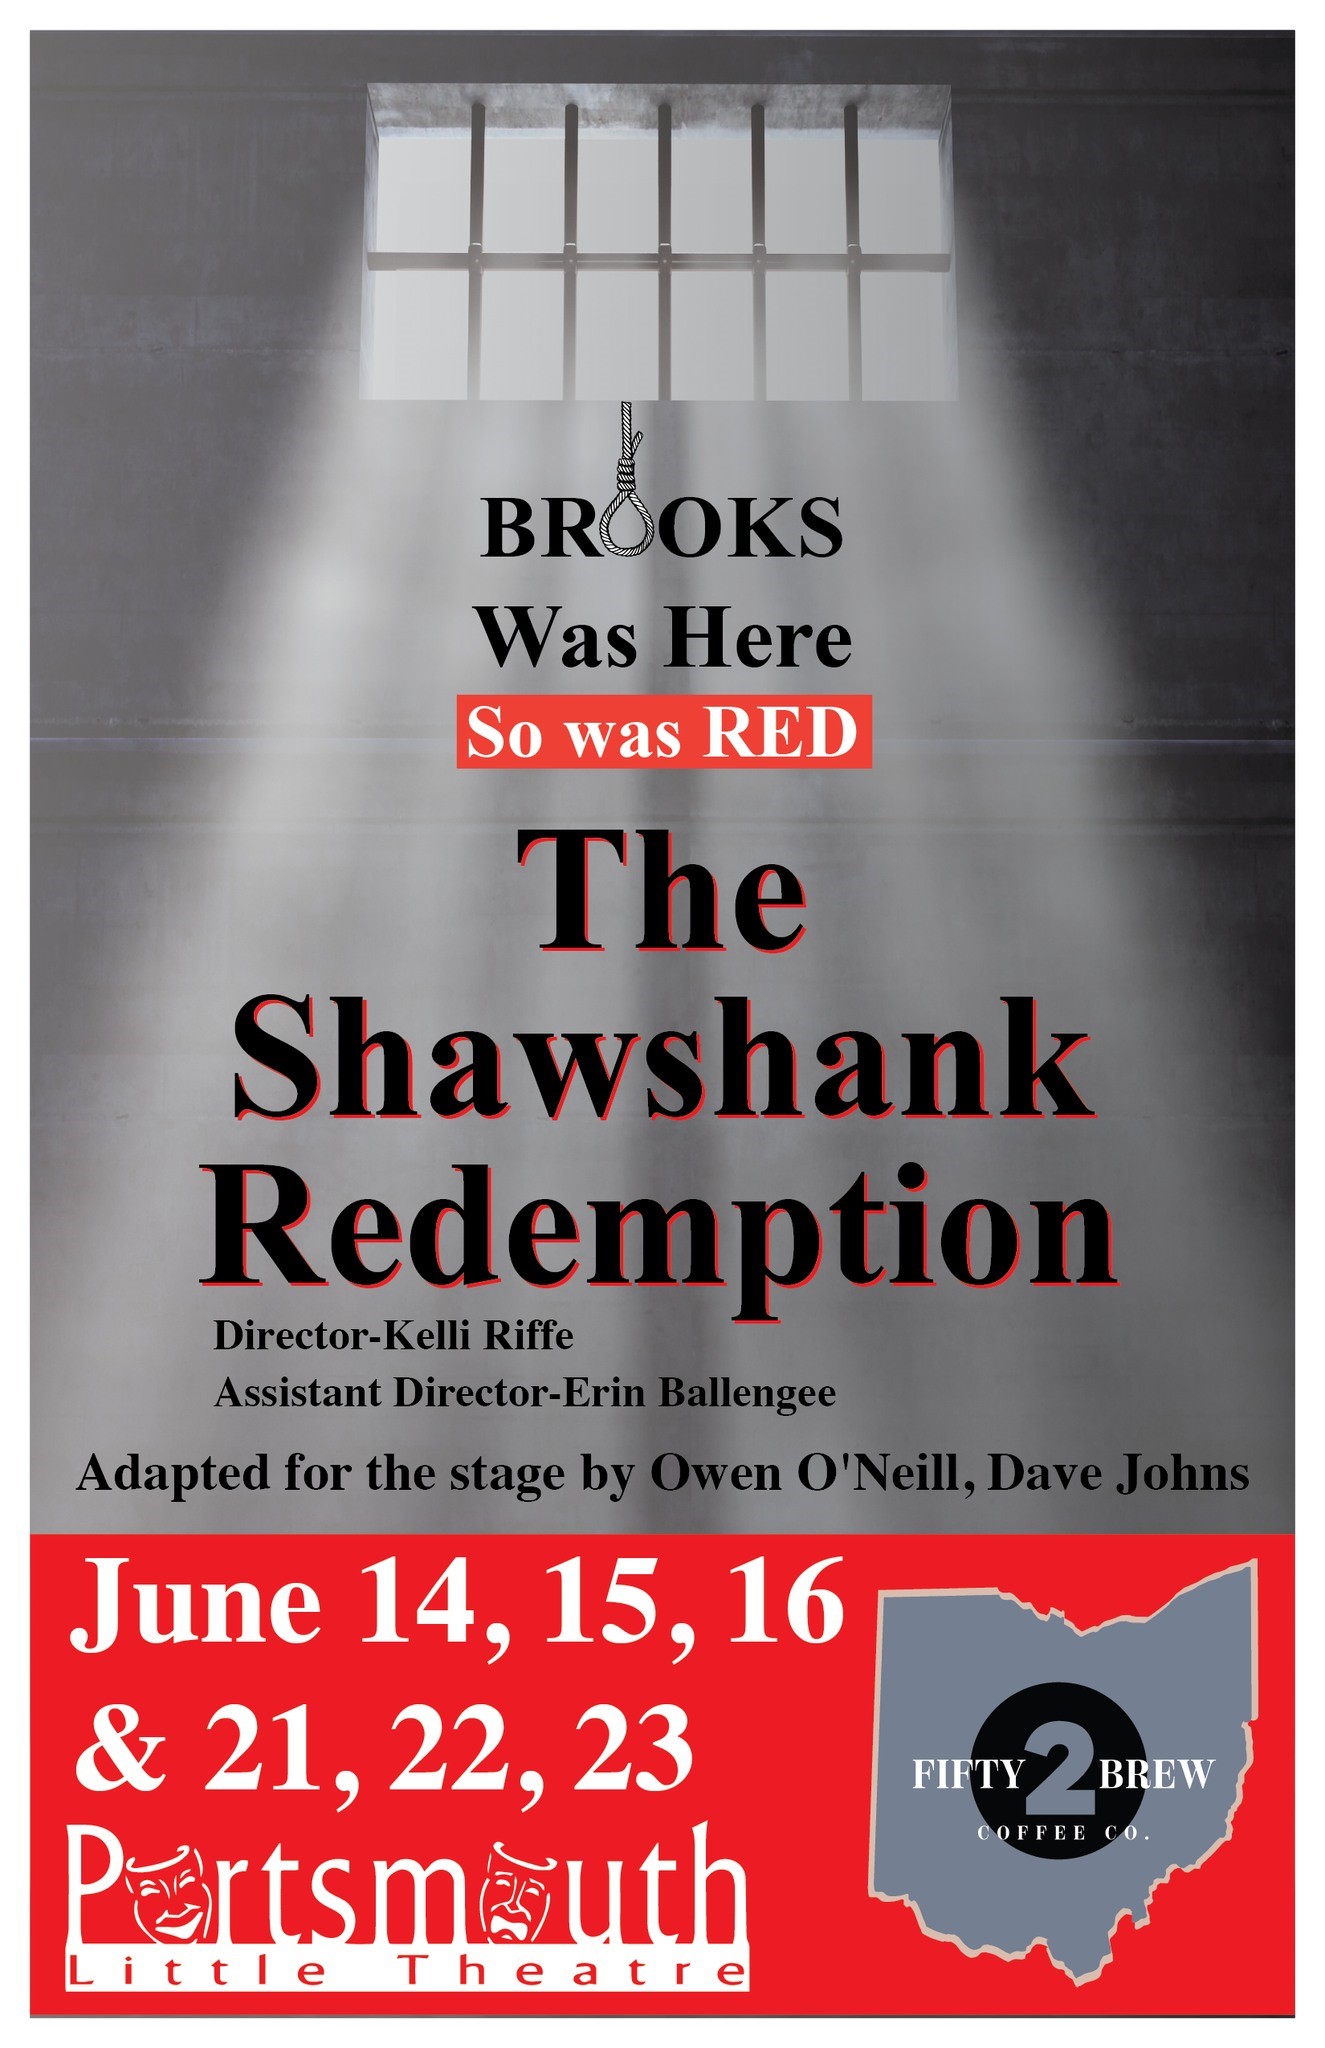 Shawshank Redemption  on Jun 15, 19:30@Portsmouth Little Theatre - Pick a seat, Buy tickets and Get information on Portsmouth Little Theatre 